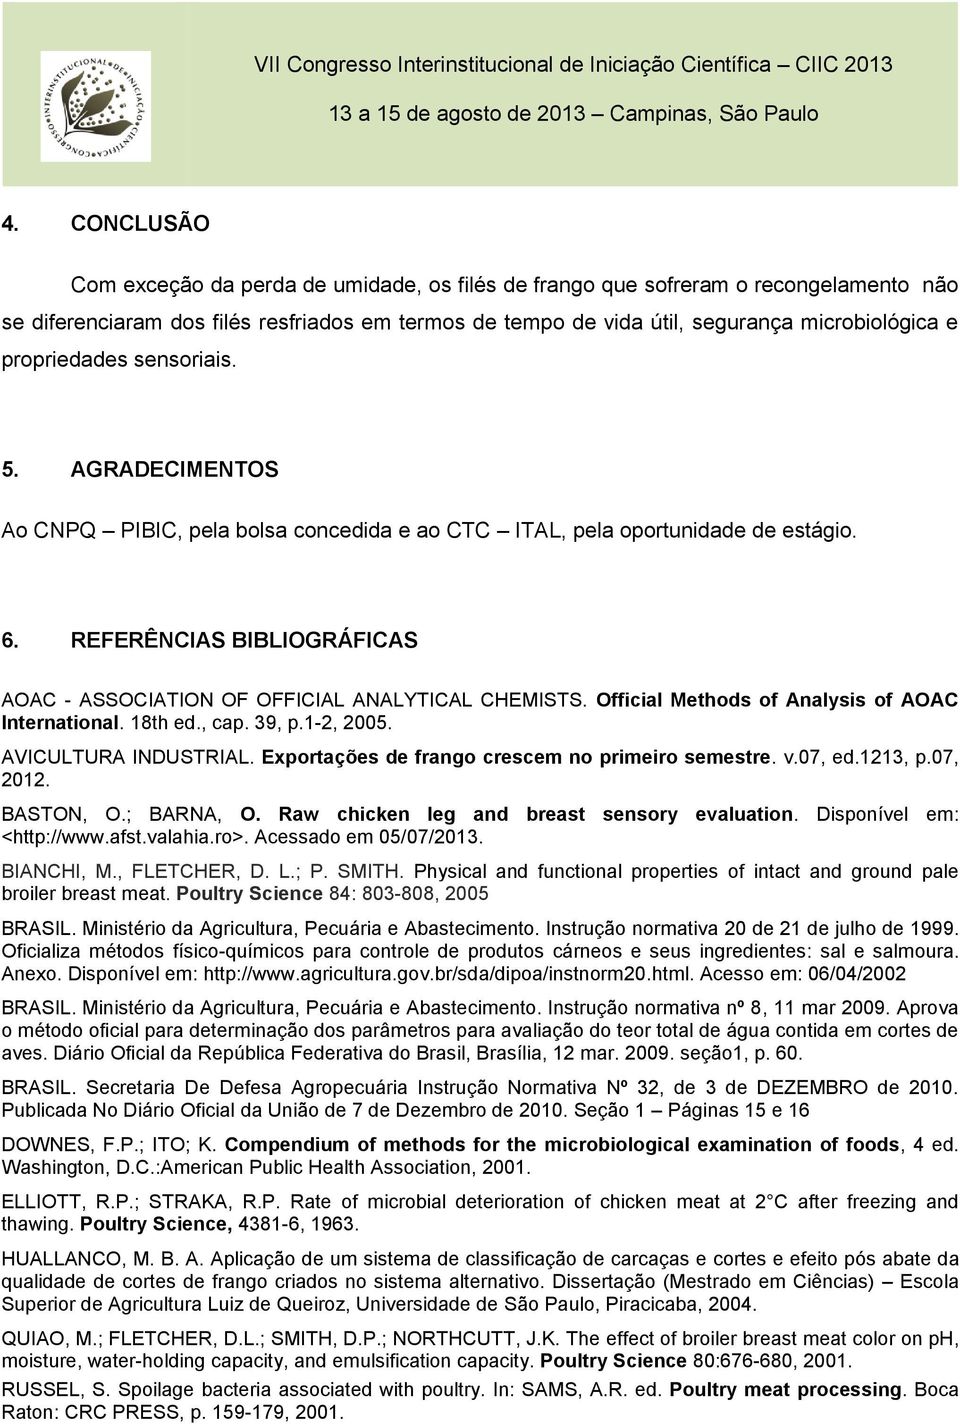 REFERÊNCIAS BIBLIOGRÁFICAS AOAC - ASSOCIATION OF OFFICIAL ANALYTICAL CHEMISTS. Official Methods of Analysis of AOAC International. 18th ed., cap. 39, p.1-2, 2005. AVICULTURA INDUSTRIAL.